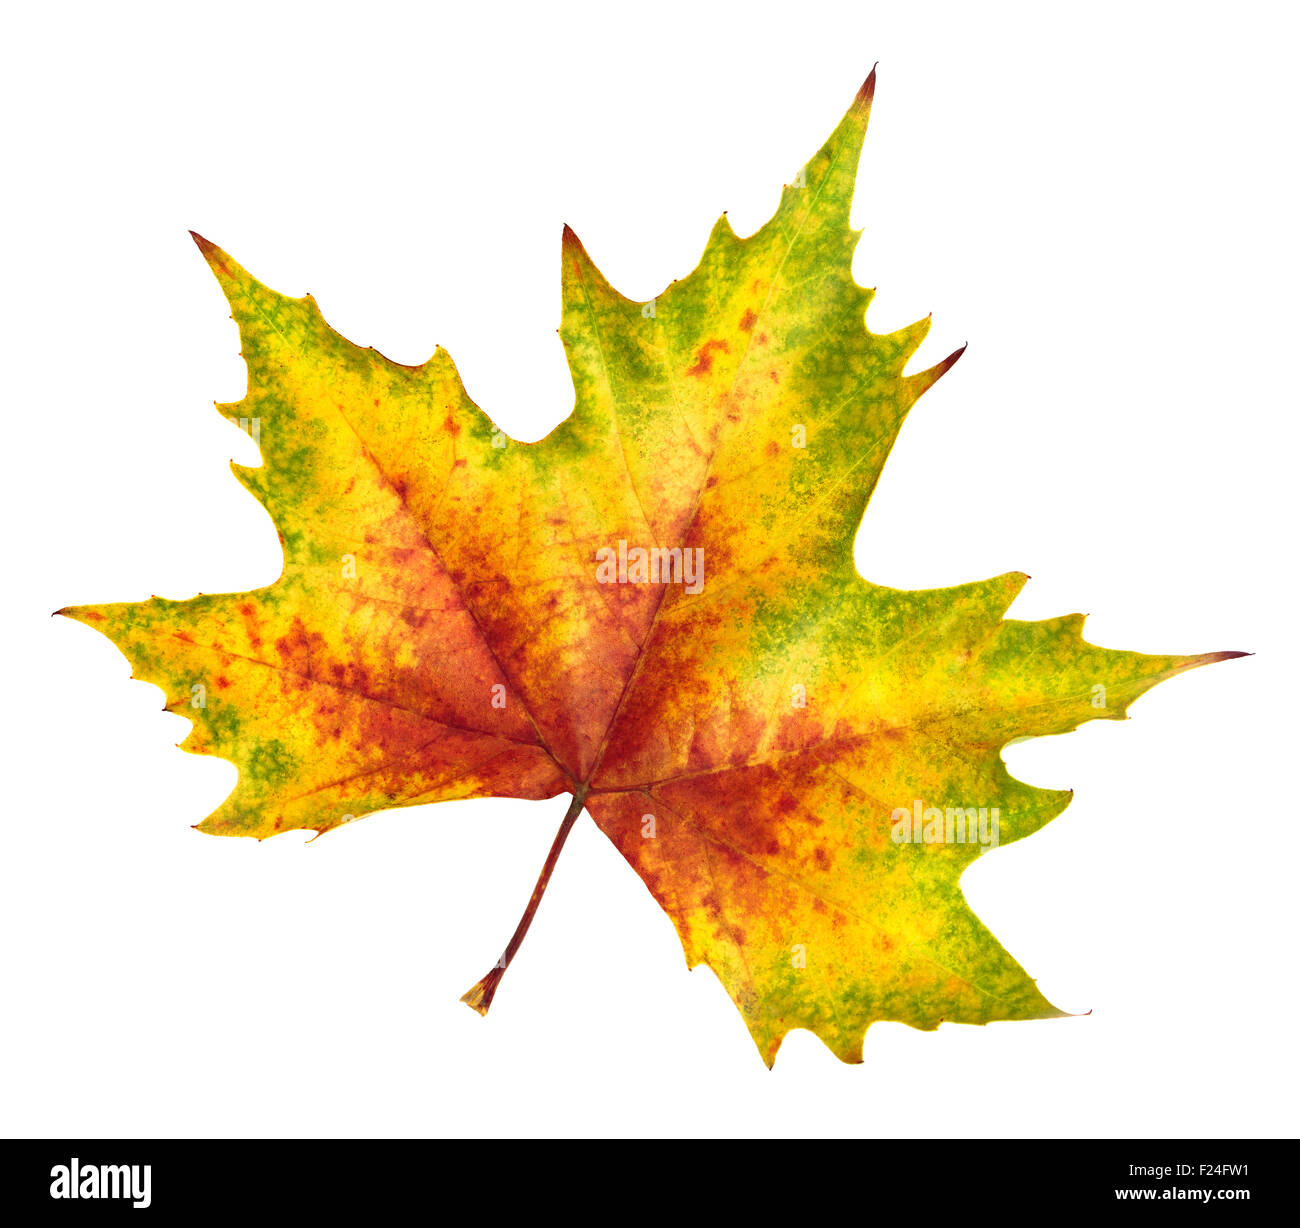 Nice colorful maple leaf in red, yellow and green, symbol for autumn, isolated on white background, rich in color and detail Stock Photo